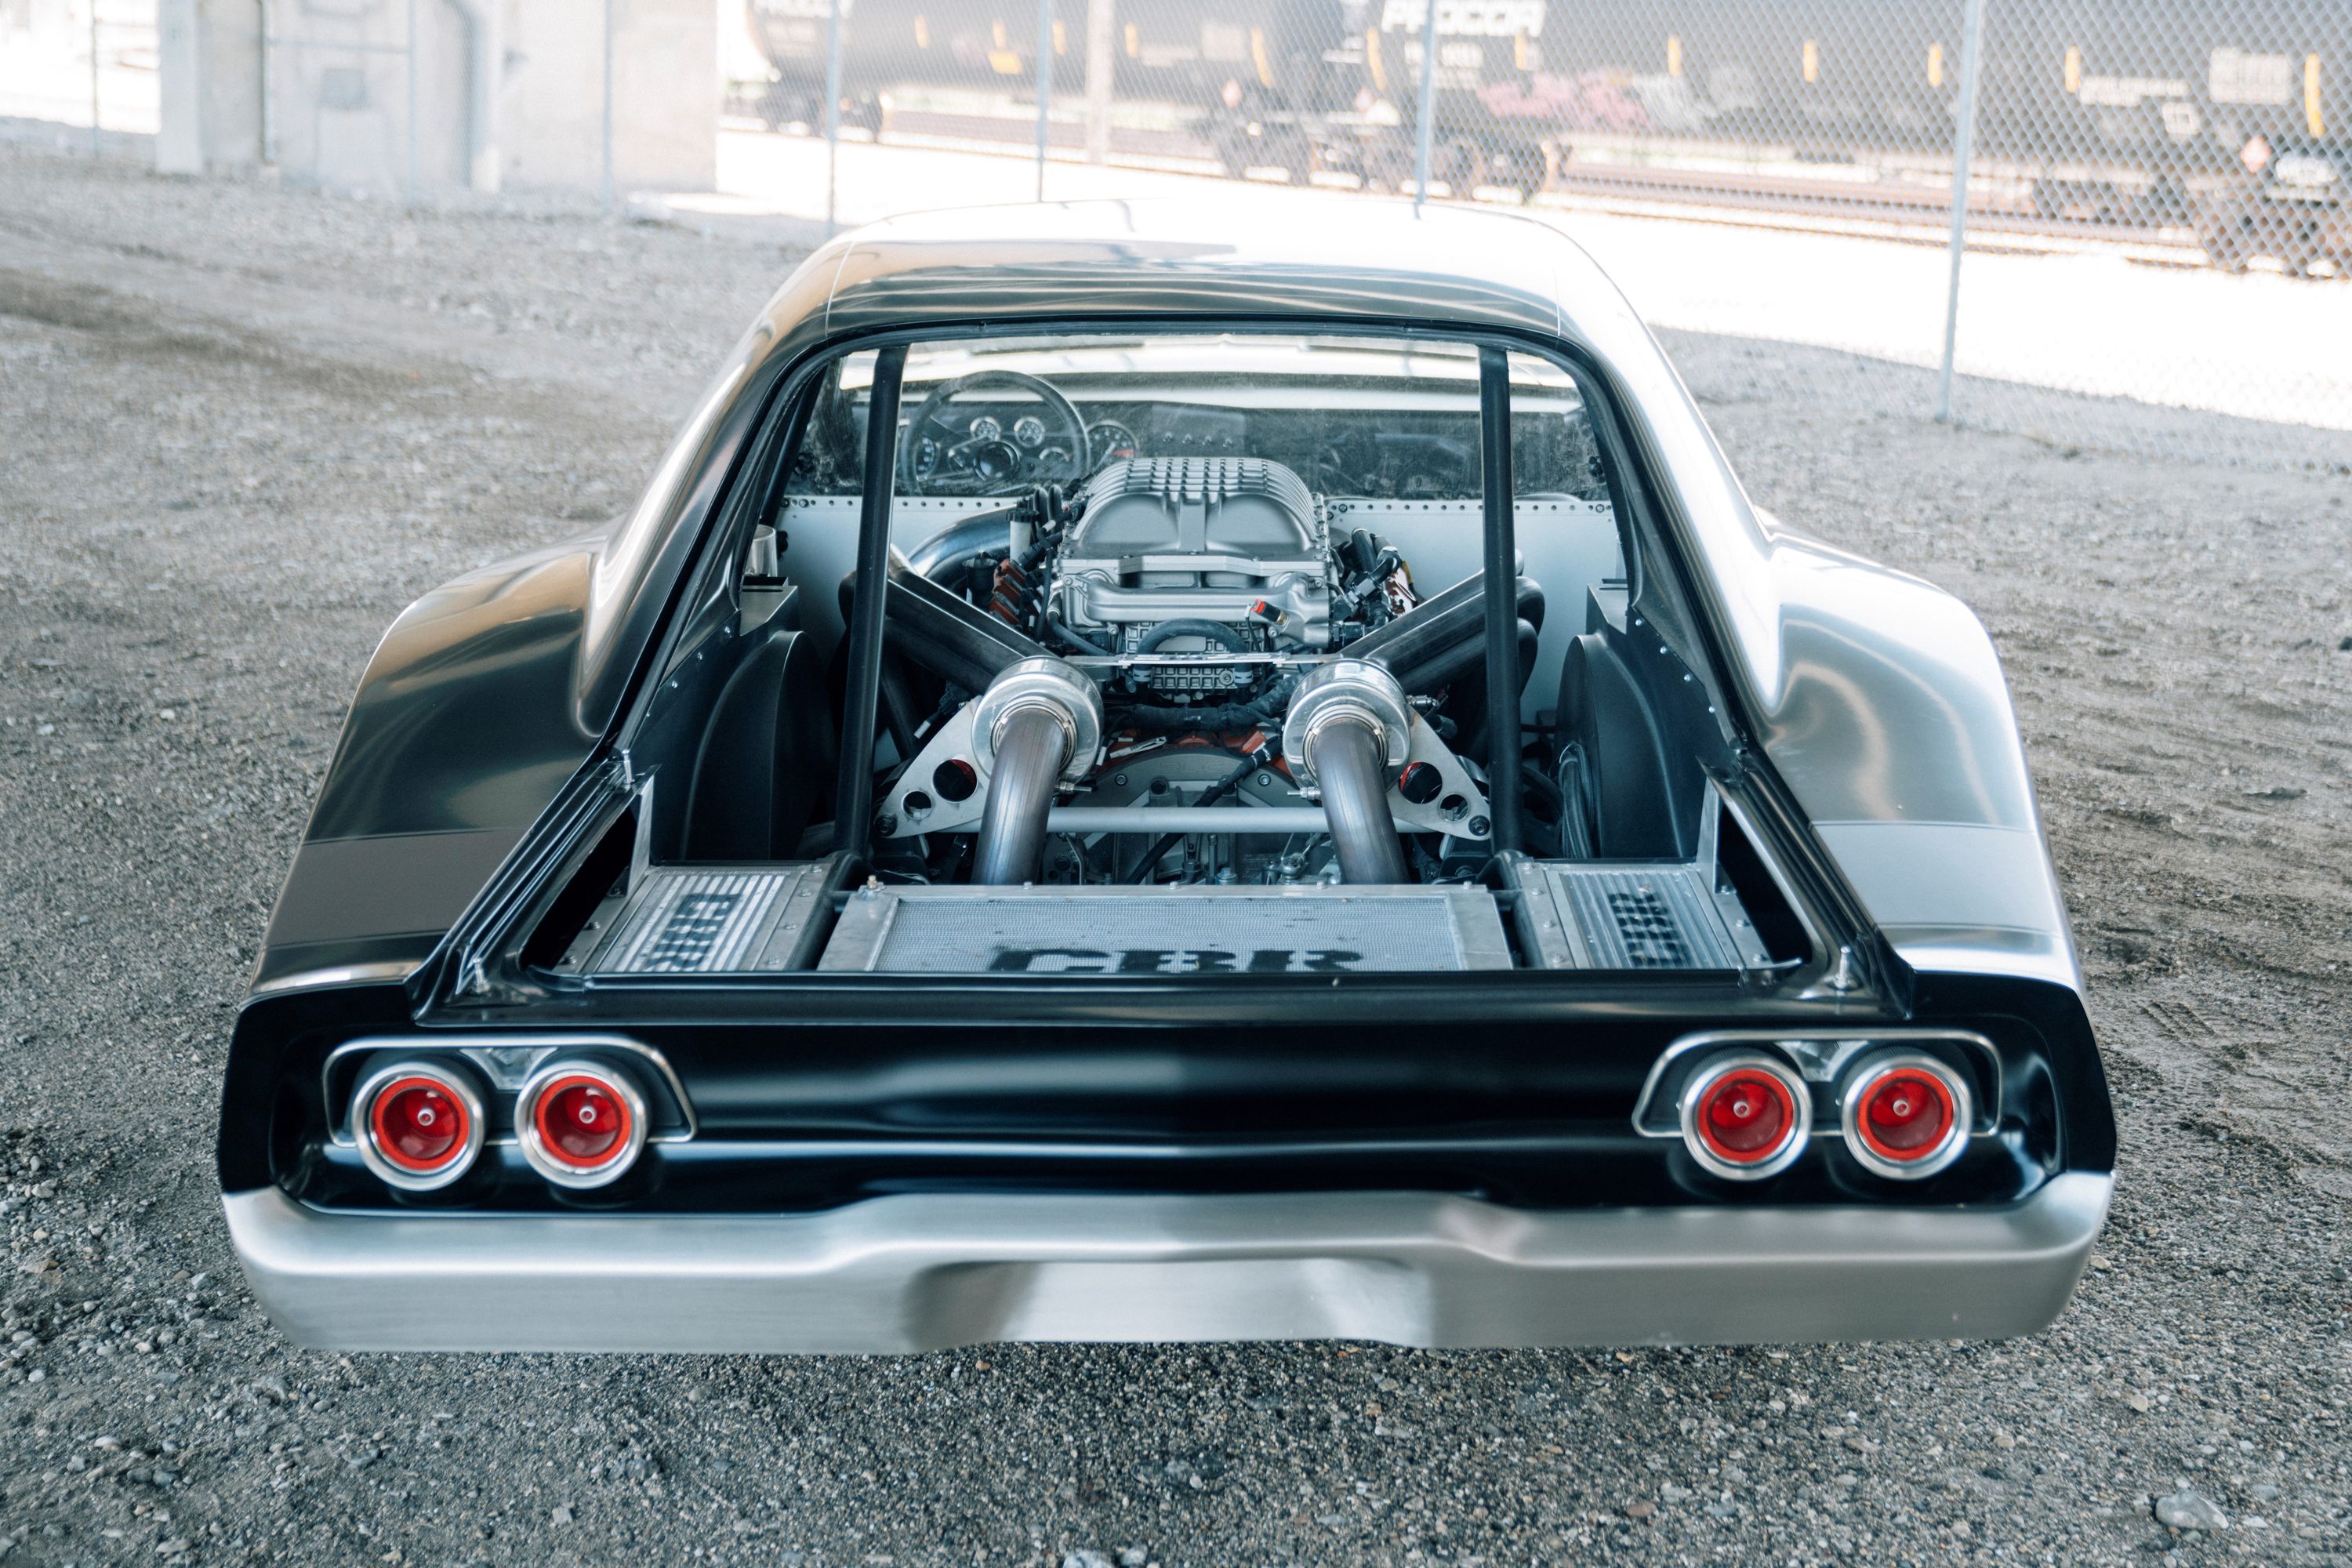 SpeedKore Built a Real-Life Mid-Engine '68 Dodge Charger From F9